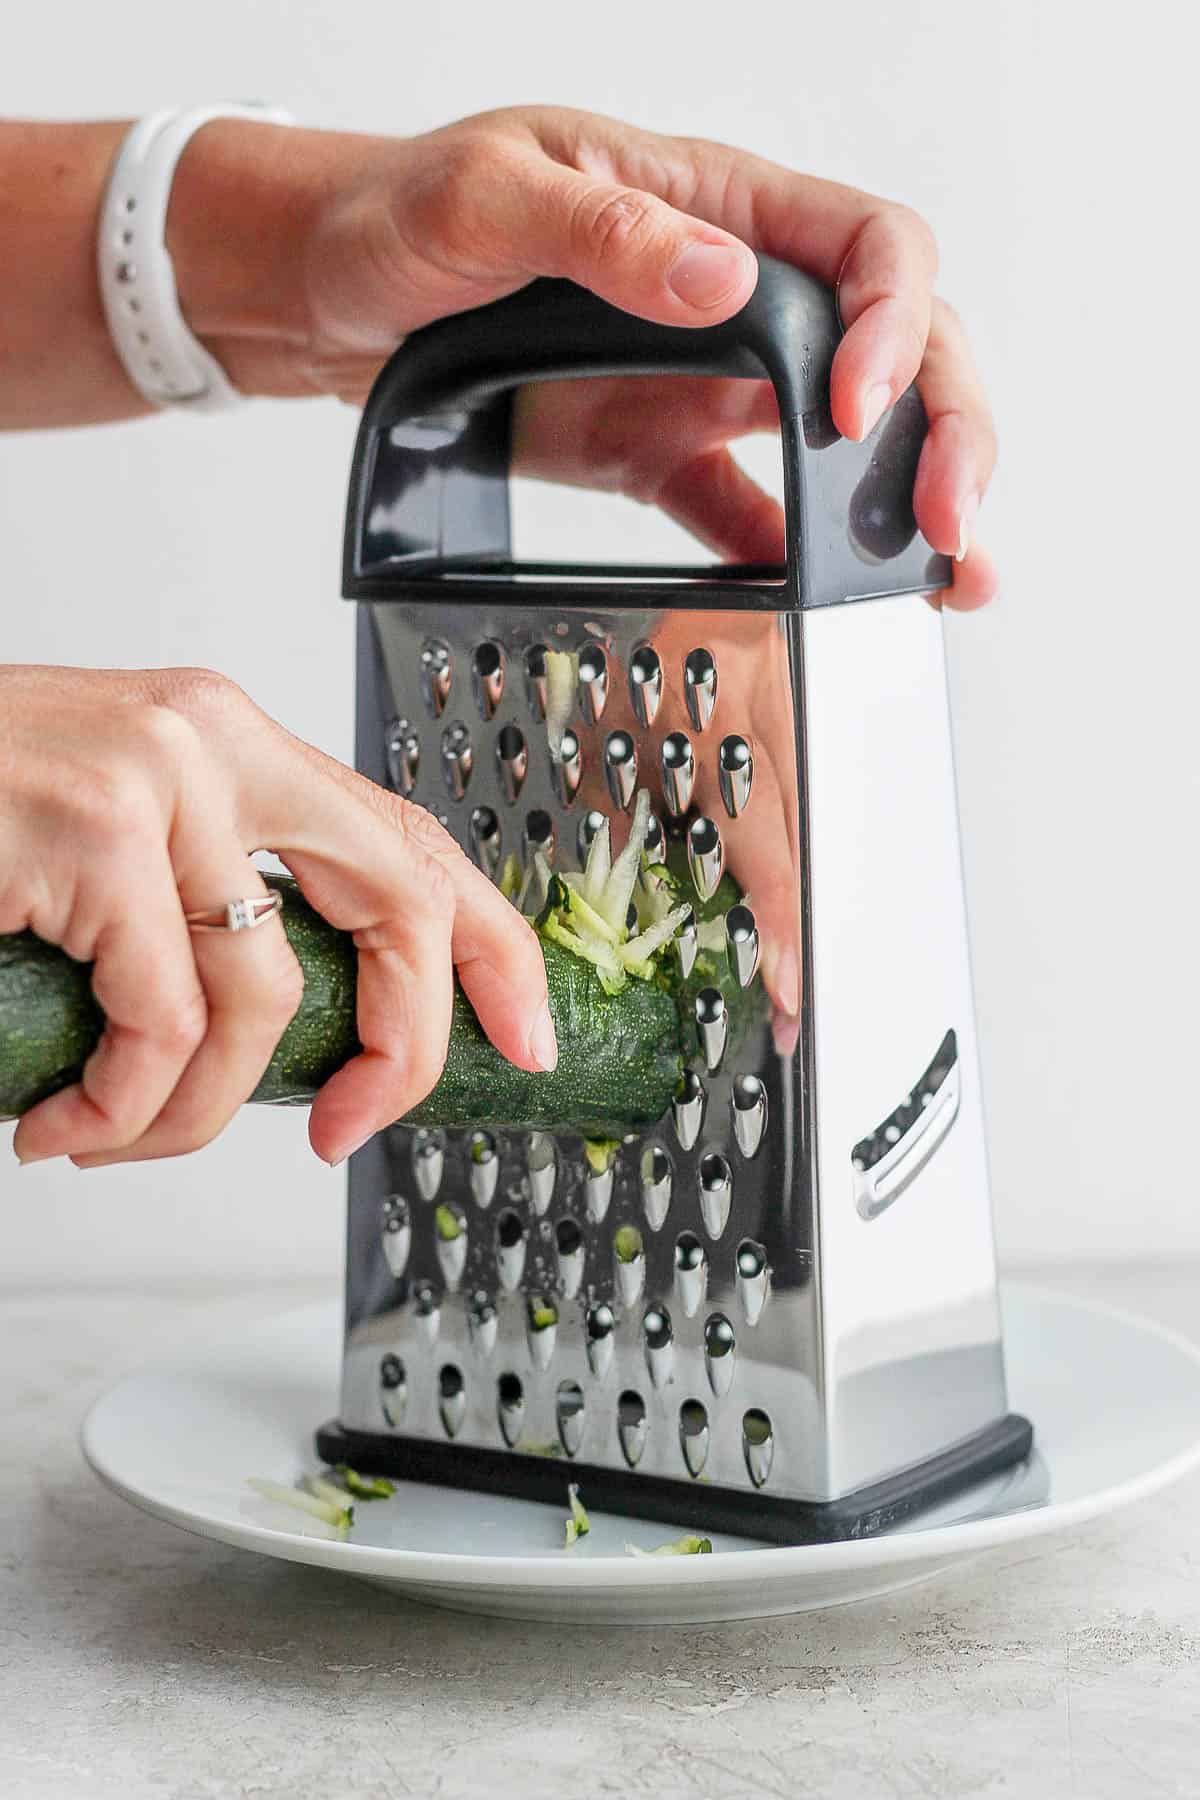 Someone grating zucchini with a box grater.